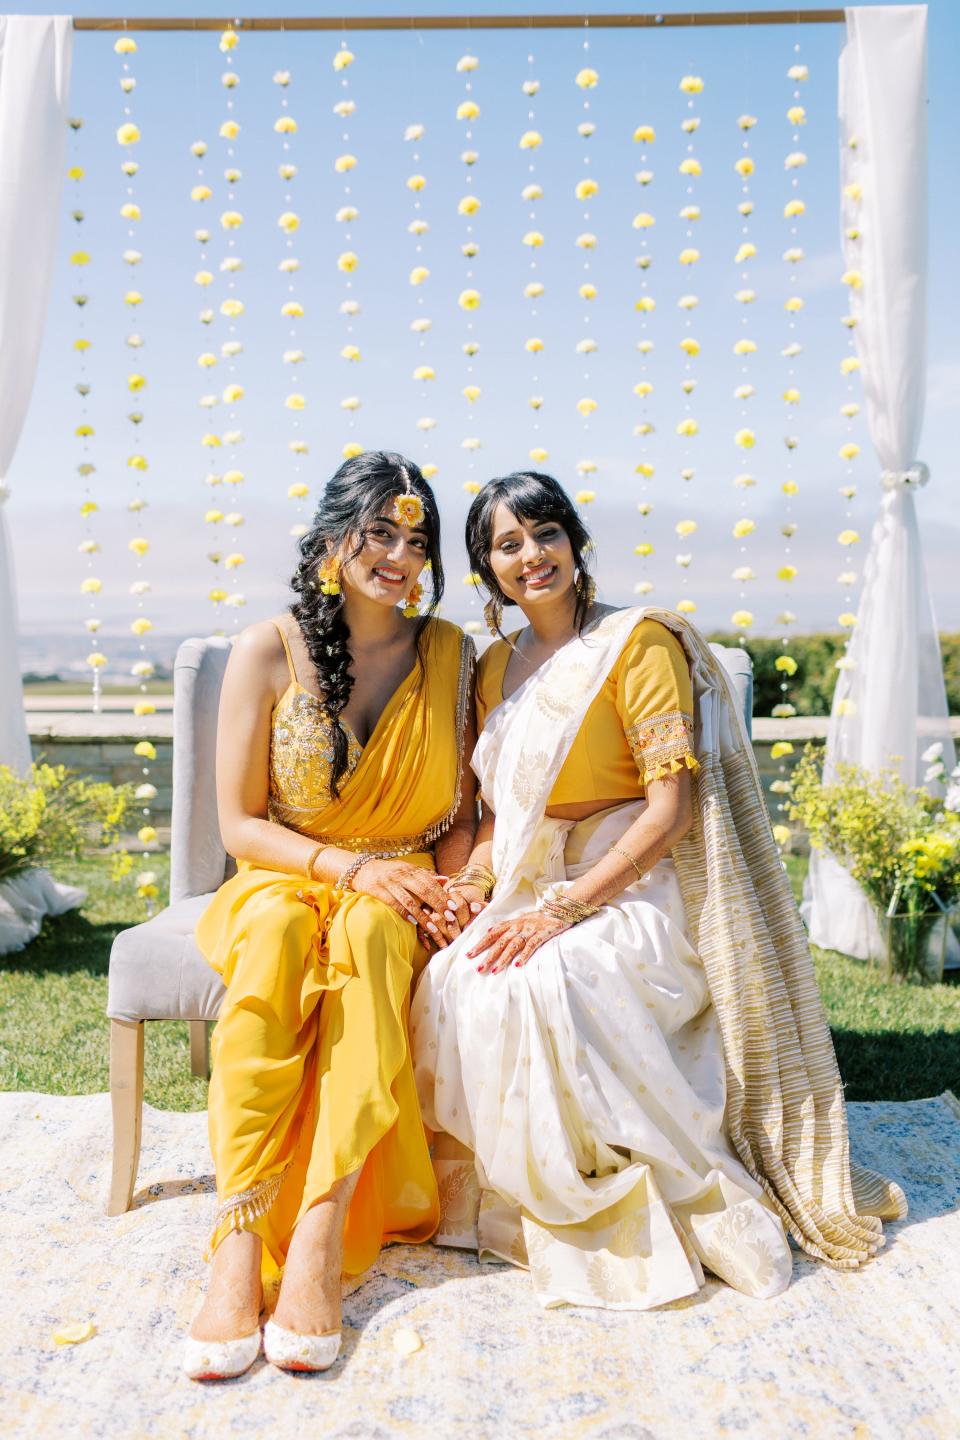 Deepa (right) and Gauri (left) decided to wear outfits at the Haldi ceremony that honored their Indian cultures.